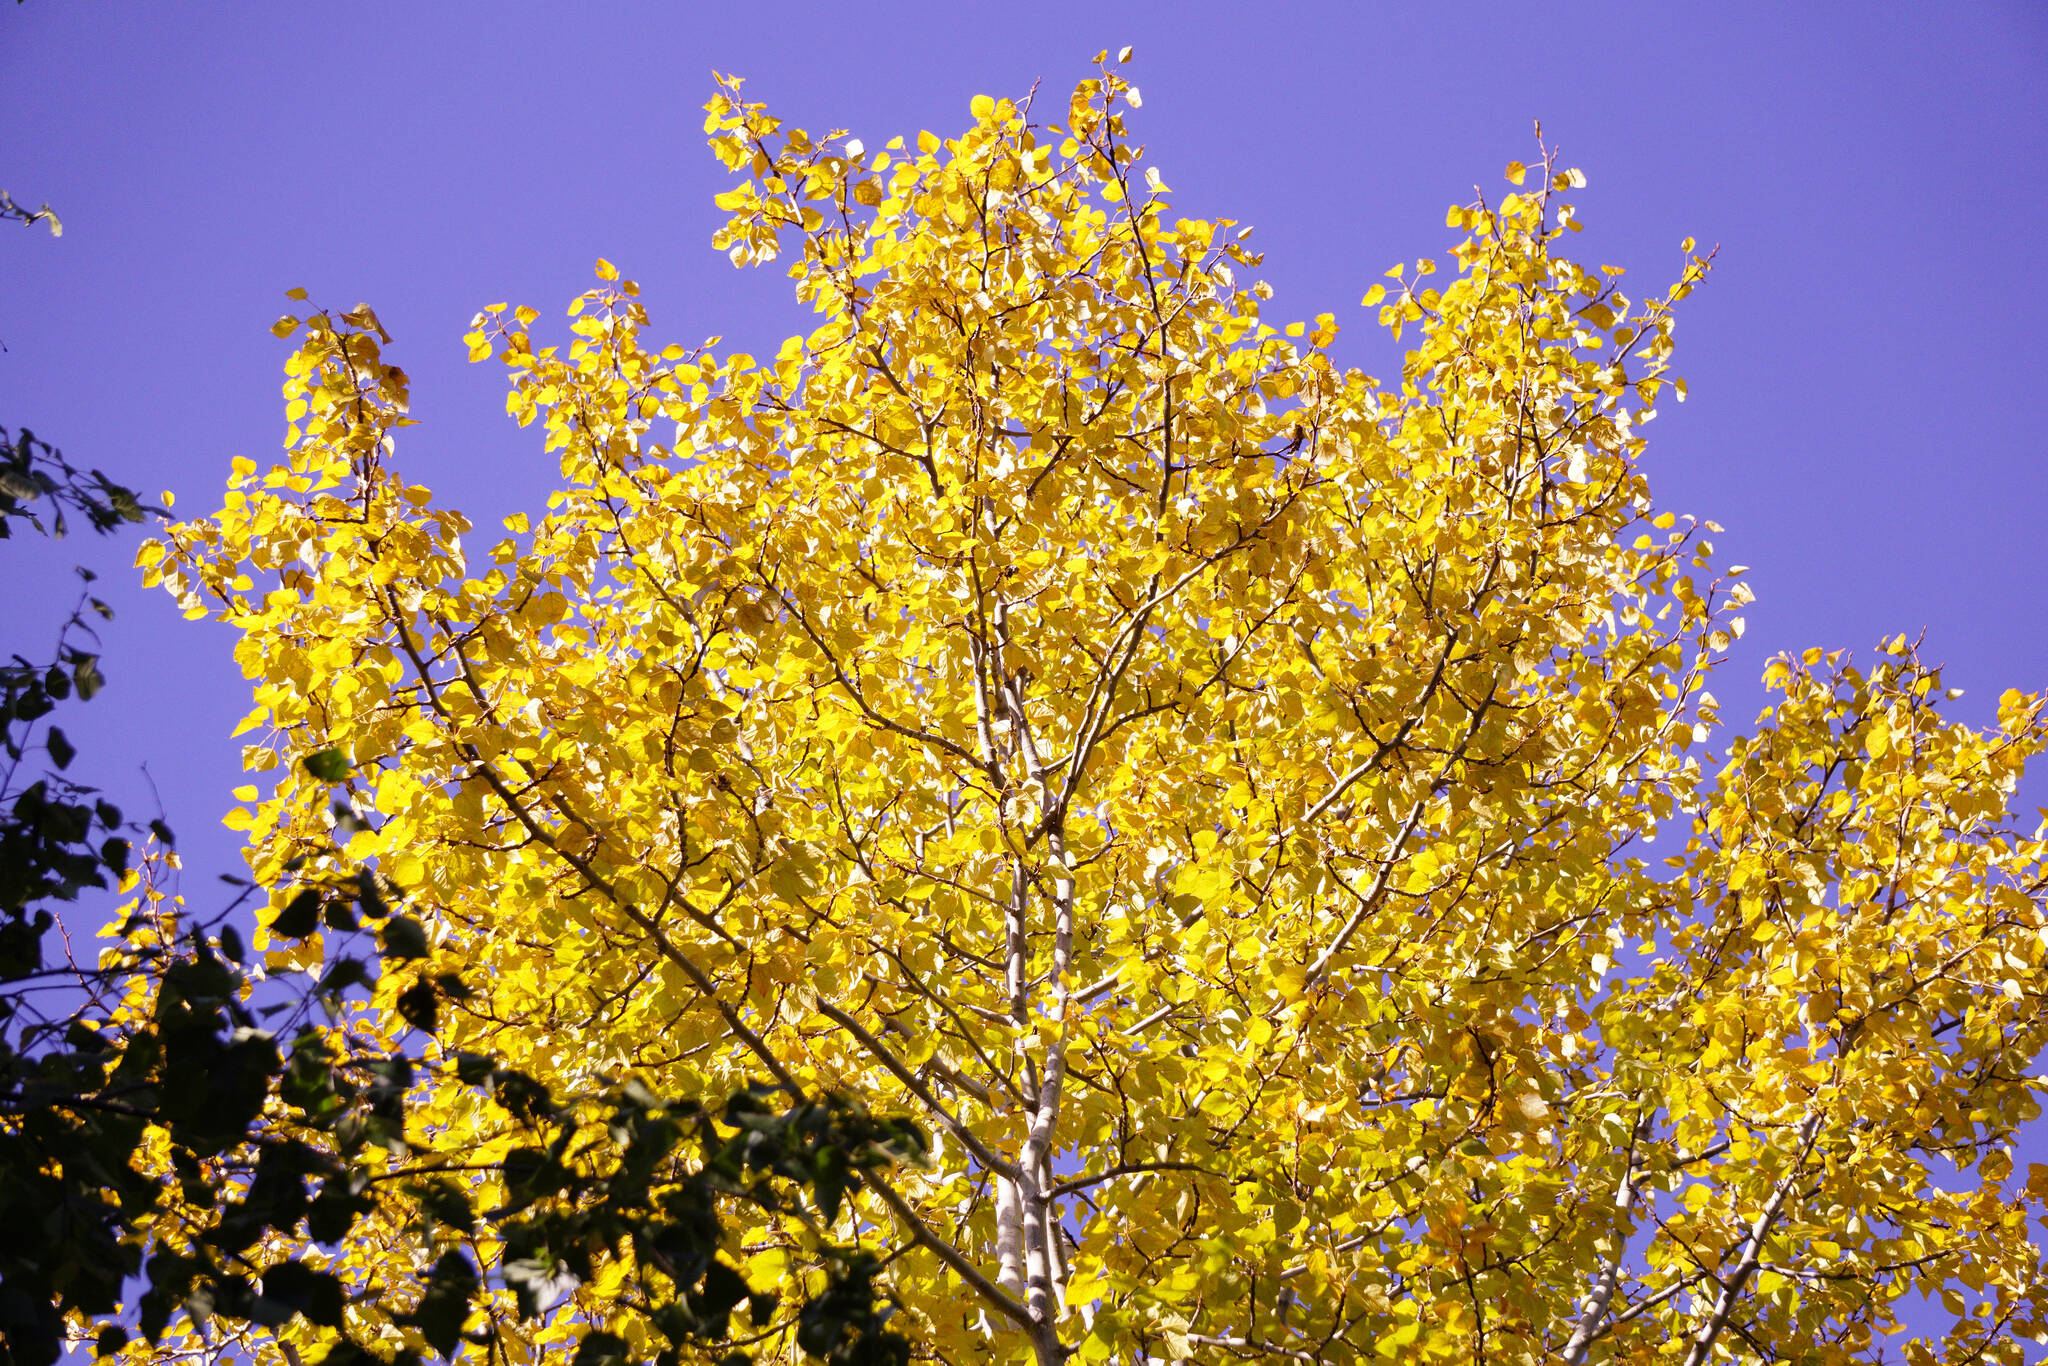 The afternoon sun makes birch leaves glow yellow on Saturday, Sept. 11, 2021, at the Hidden Lake Campground in the Kenai National Wildlife Refuge near Sterling, Alaska. (Photo by Michael Armstrong/Homer News)